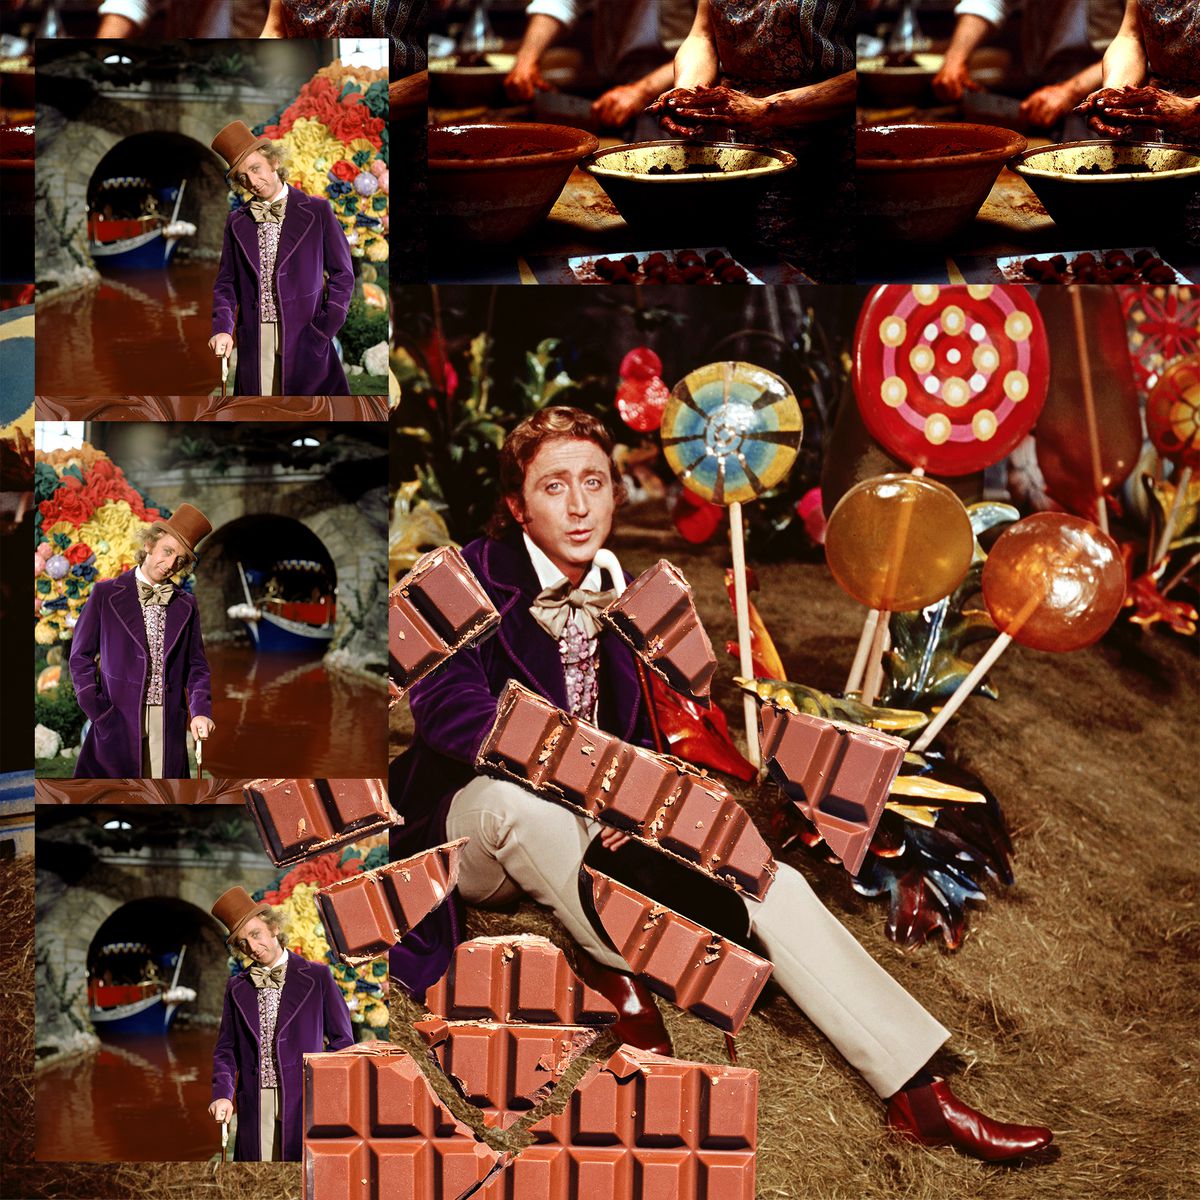 A collage of scenes from the 1971 film Willy Wonka and the Chocolate Factory